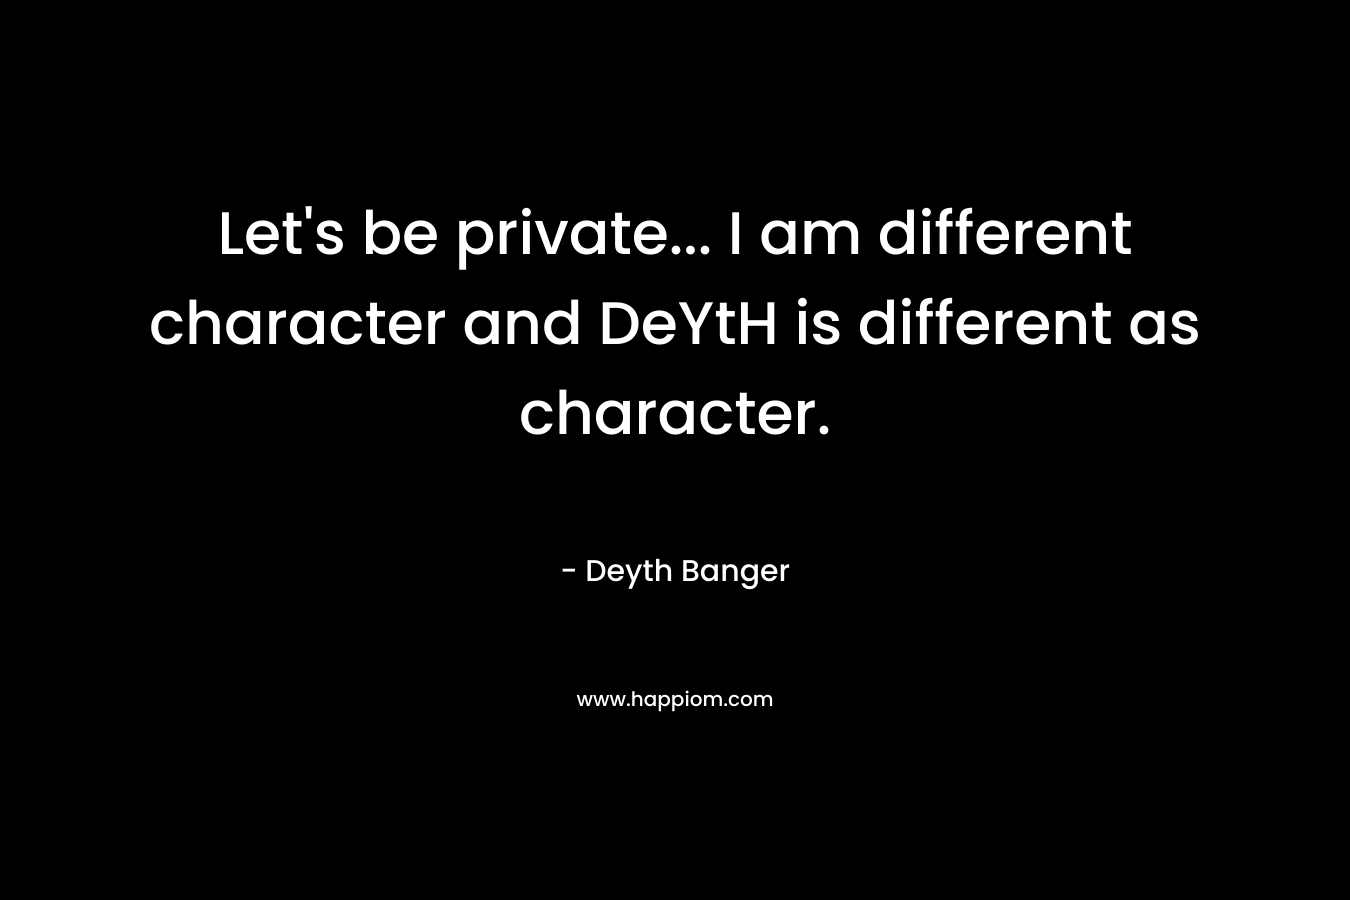 Let's be private... I am different character and DeYtH is different as character.